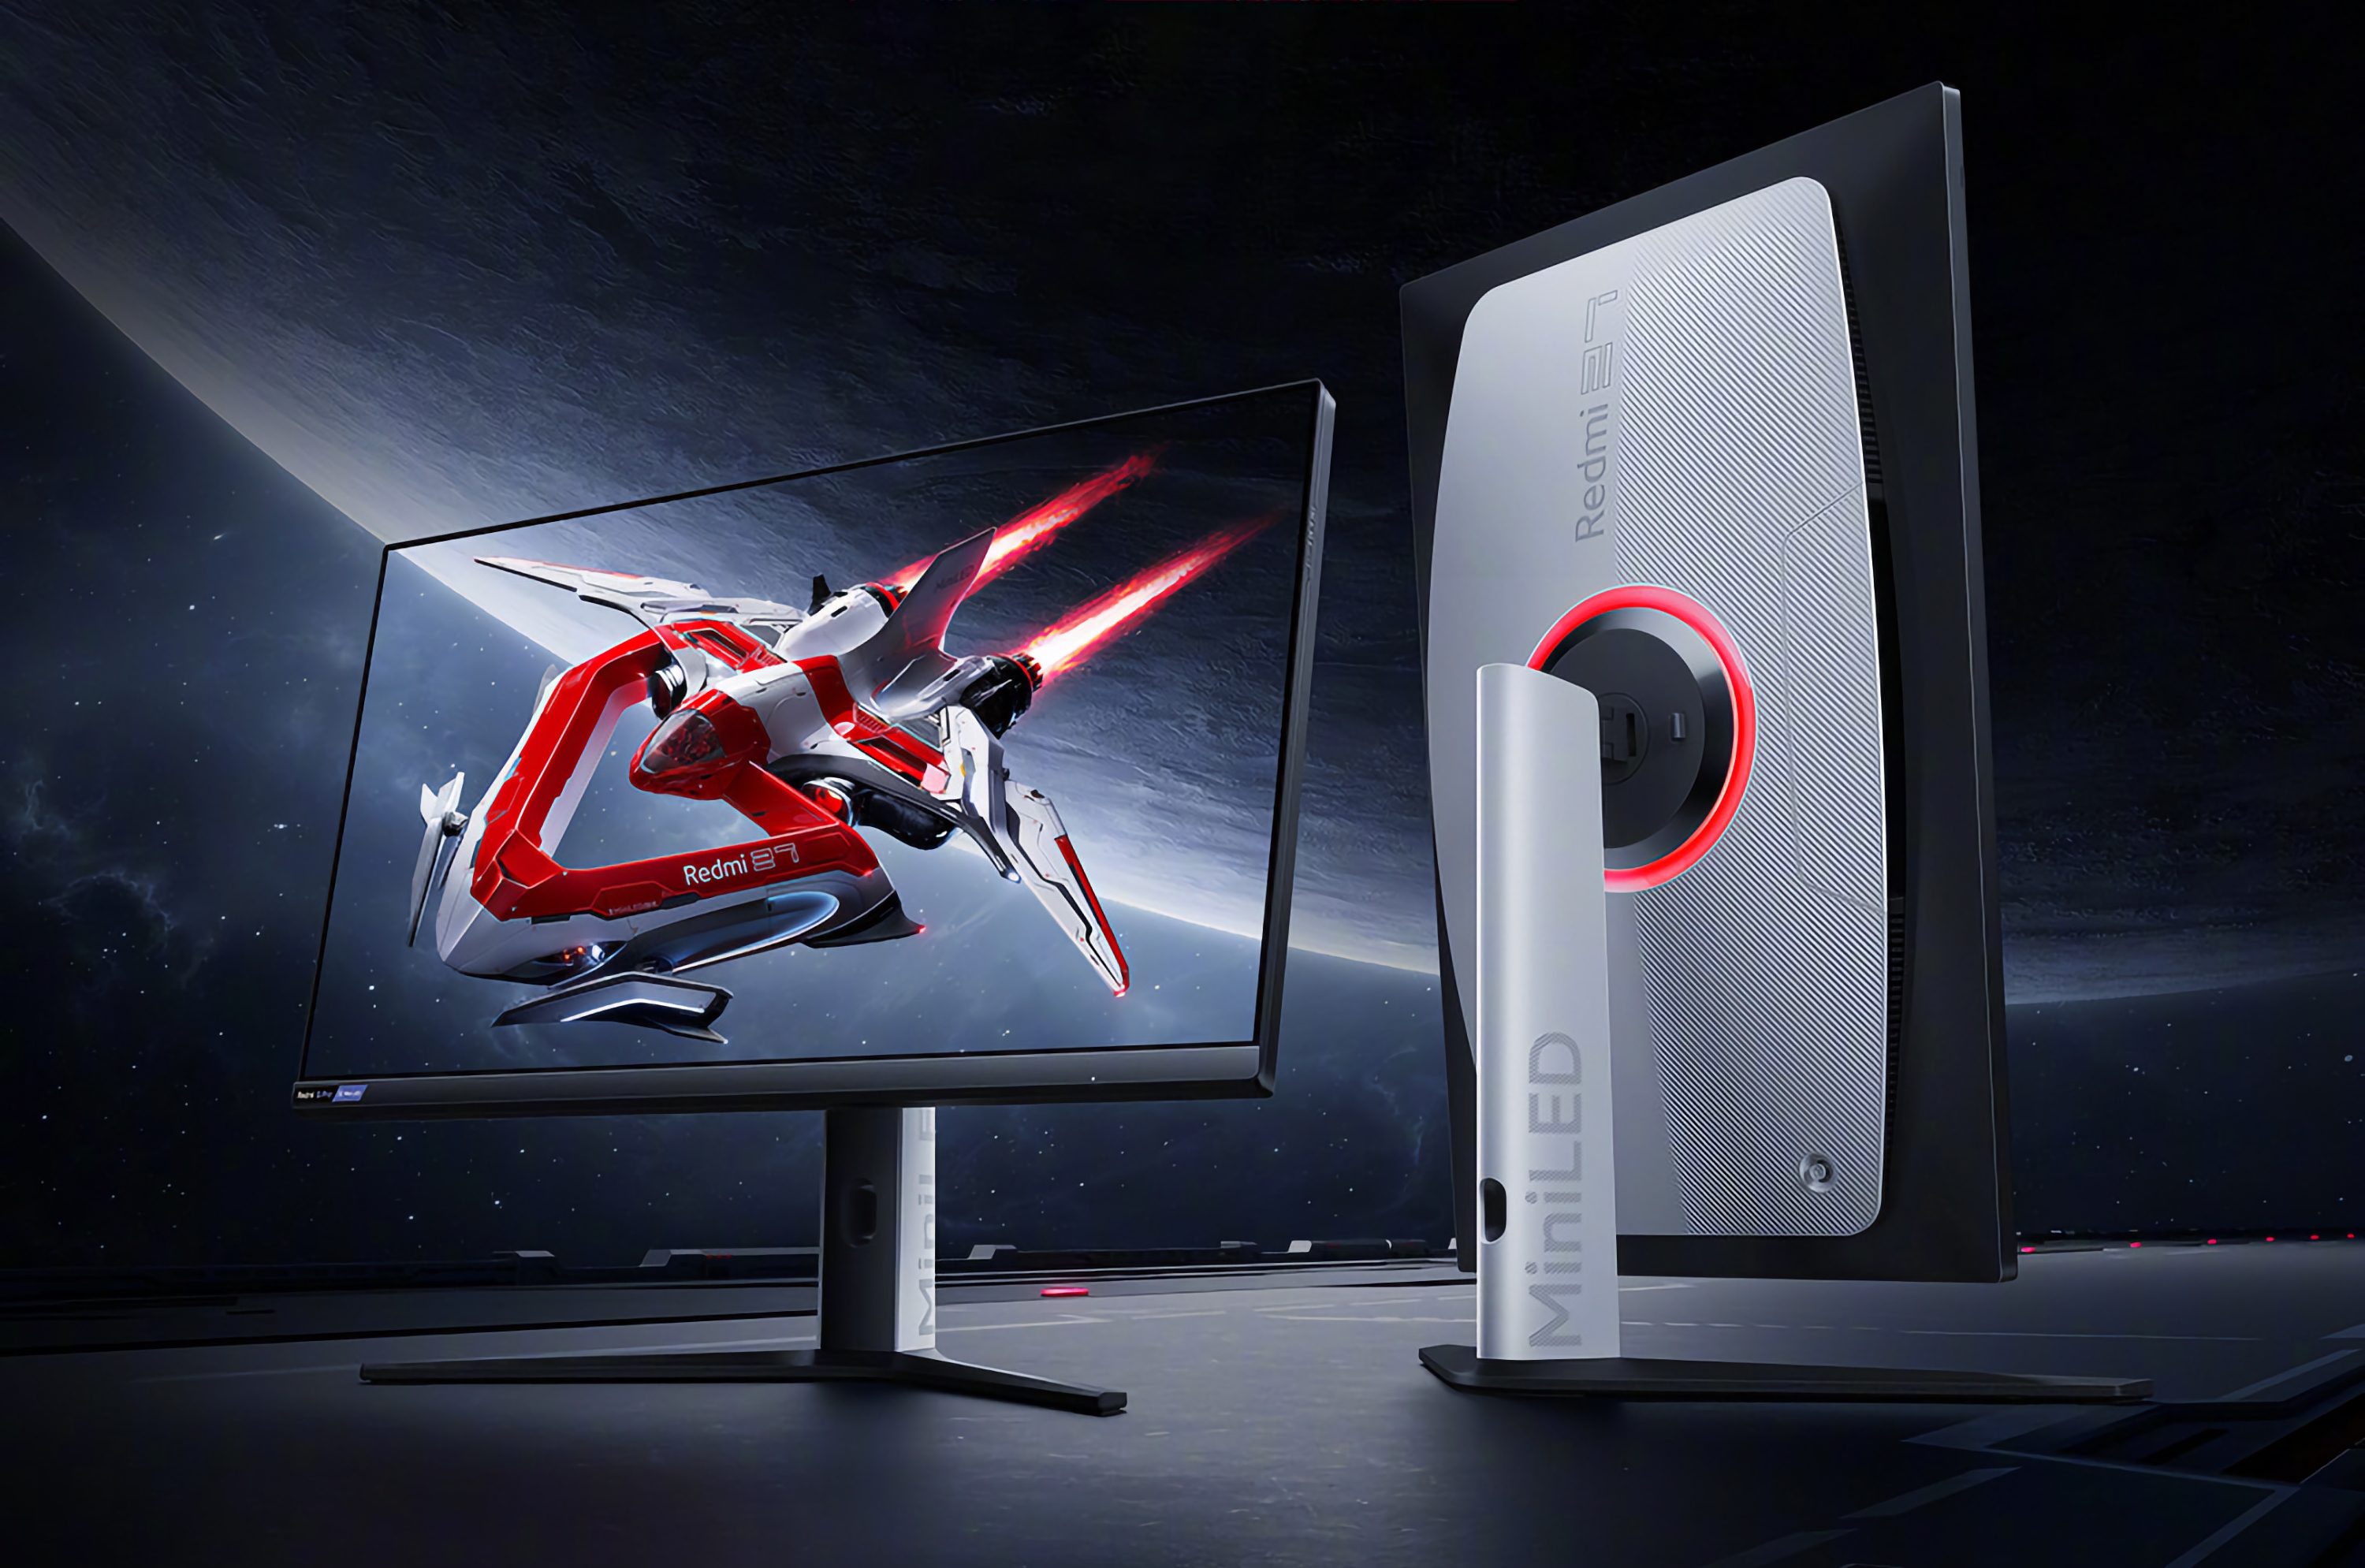 Redmi Display G Pro: 27-inch gaming monitor with 180Hz Mini LED panel for $277